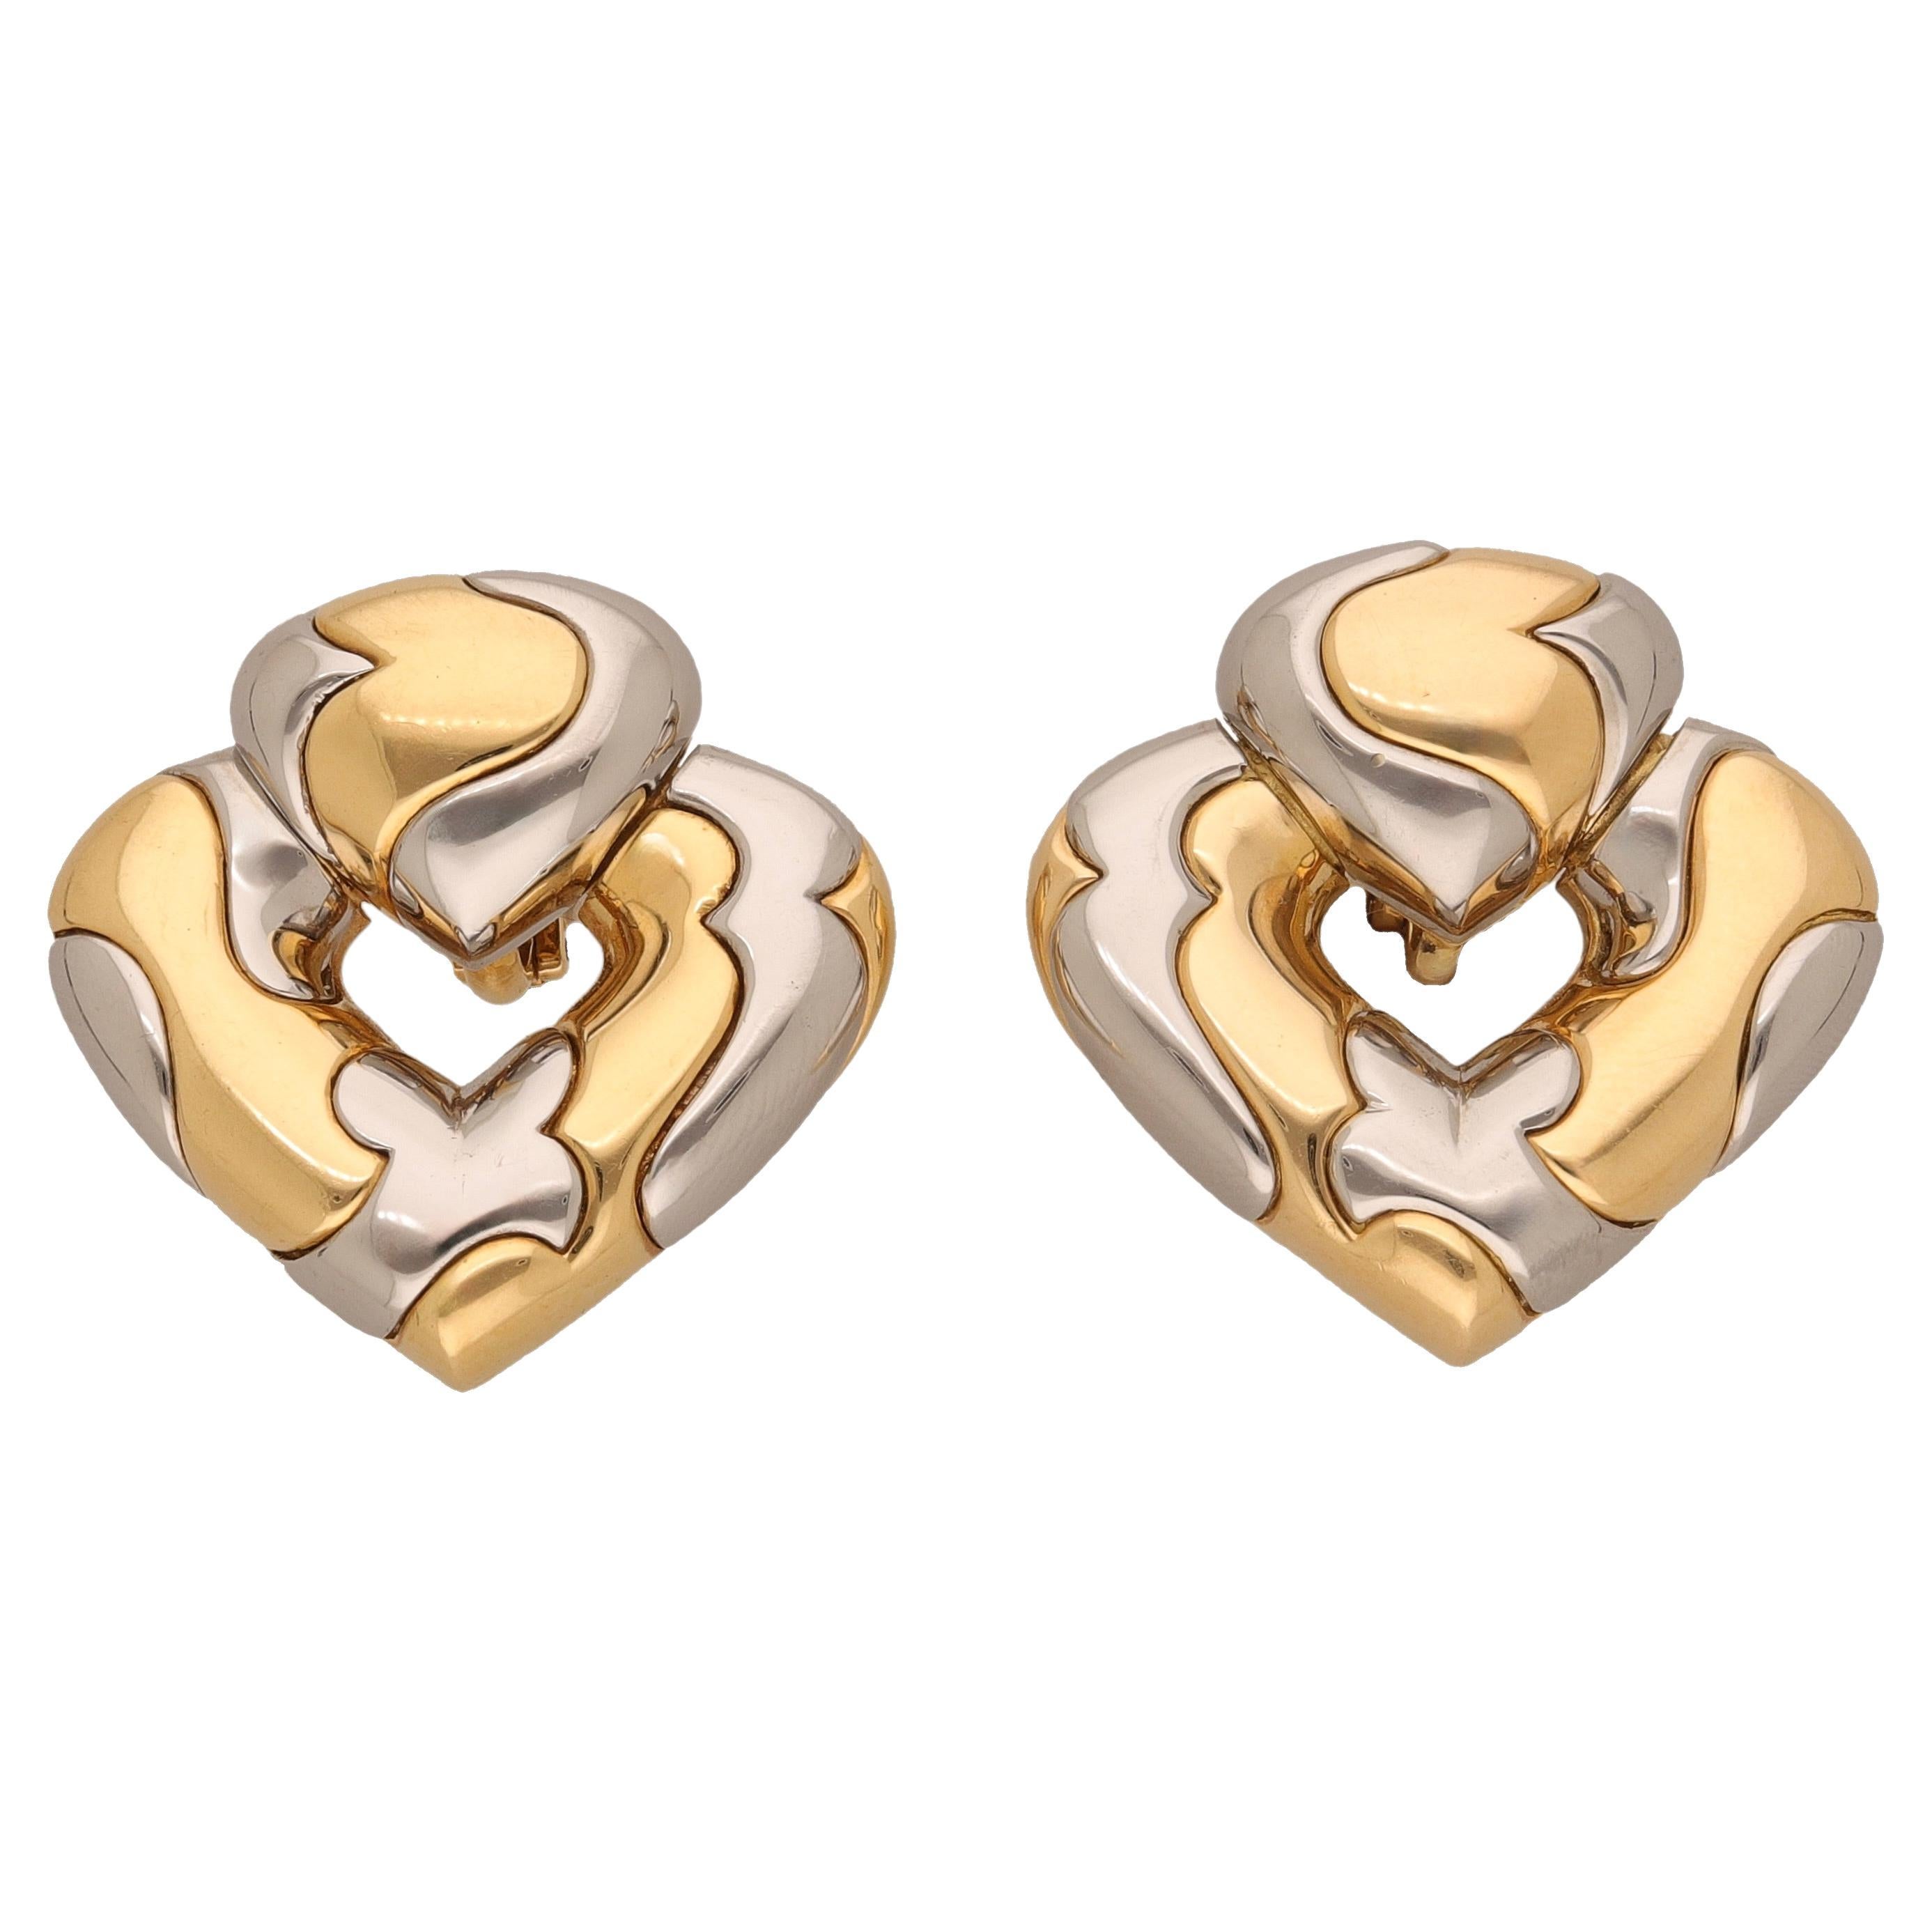 1987 Marina B. Yellow Gold Stell Heart Shaped Clip-on Earrings